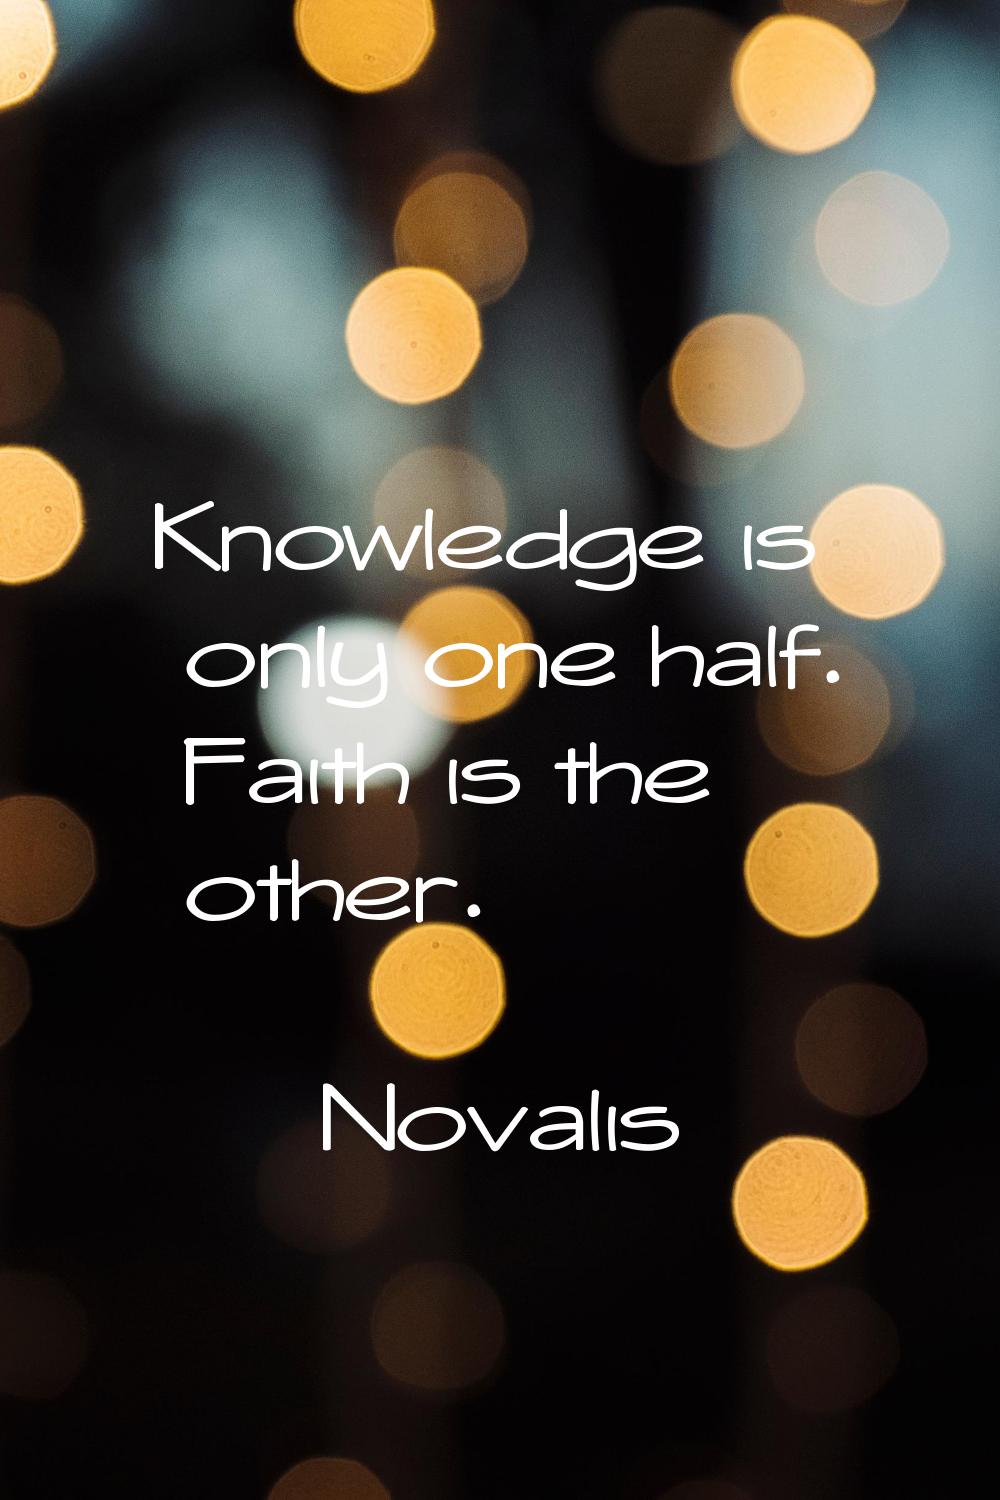 Knowledge is only one half. Faith is the other.